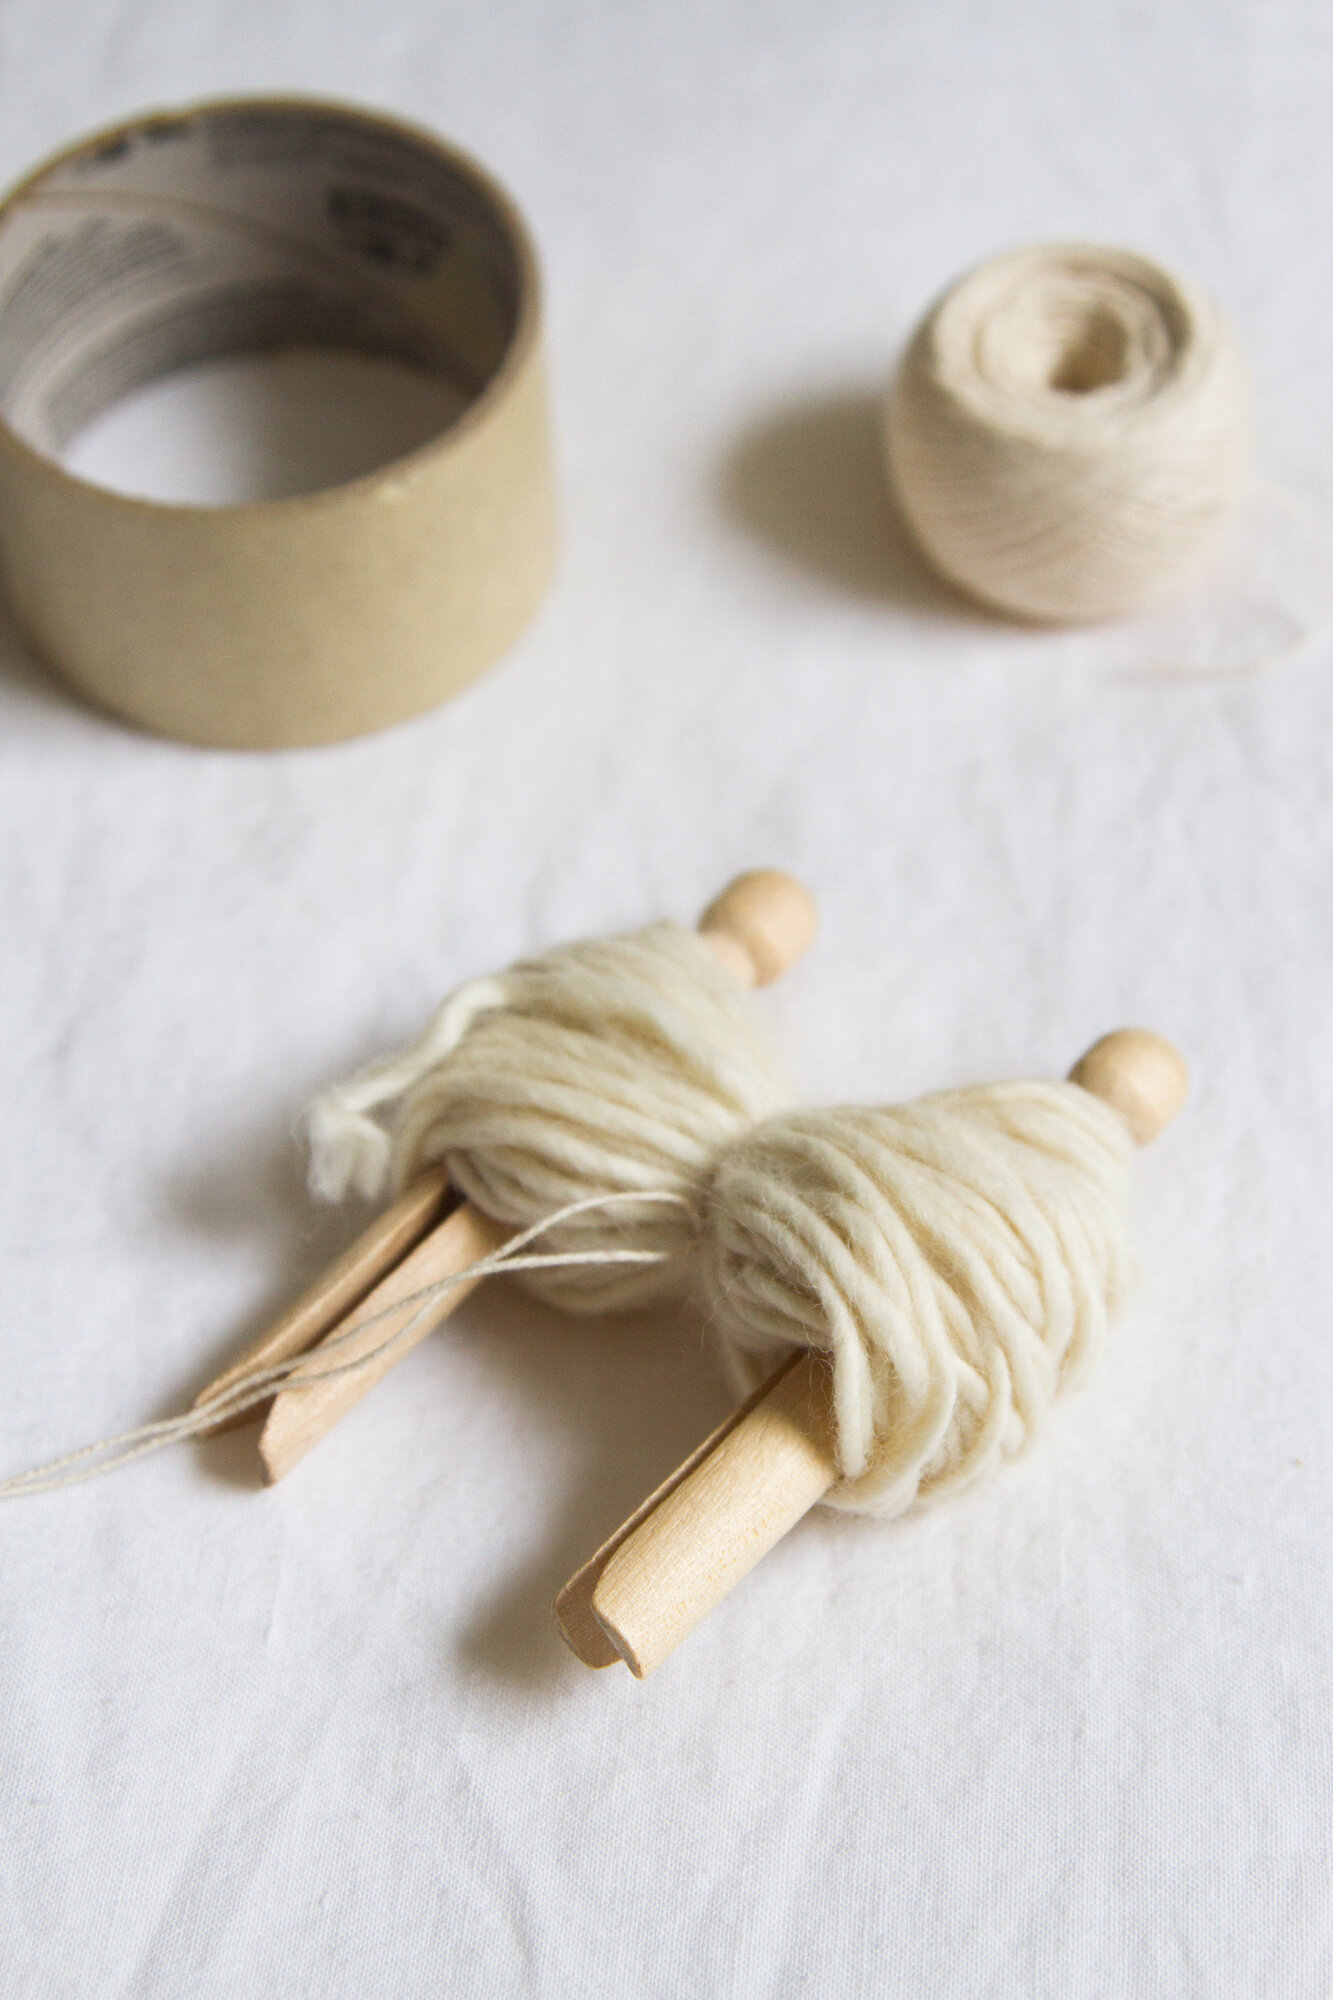 make your own pom-poms and tassels | reading my tea leaves